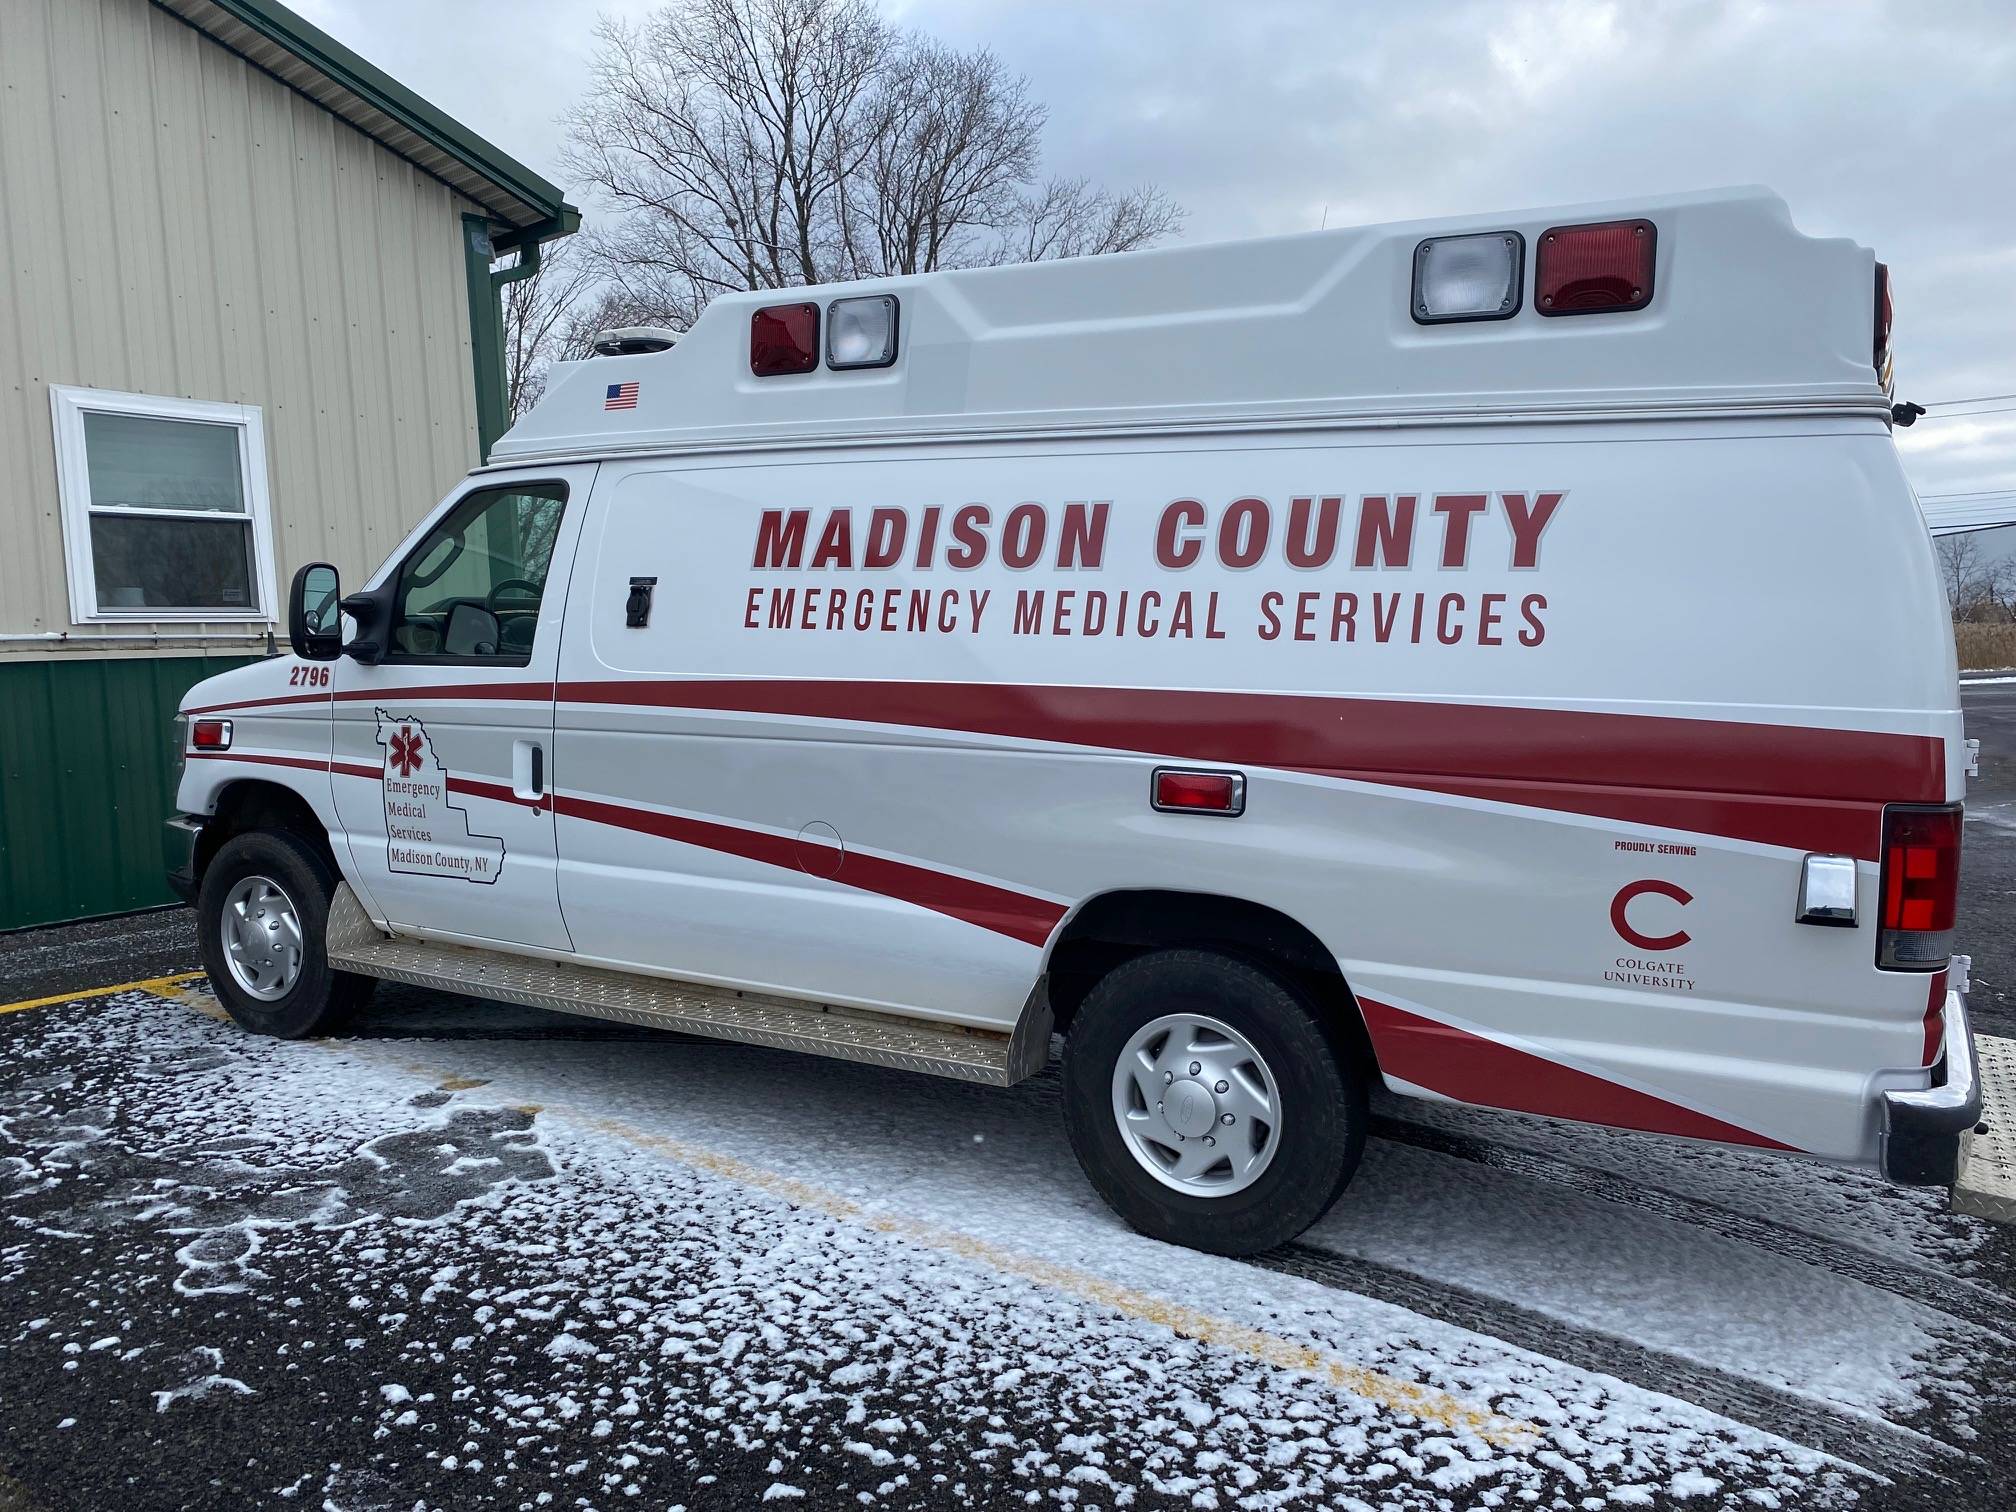 A Madison County EMS ambulance with a Colgate C